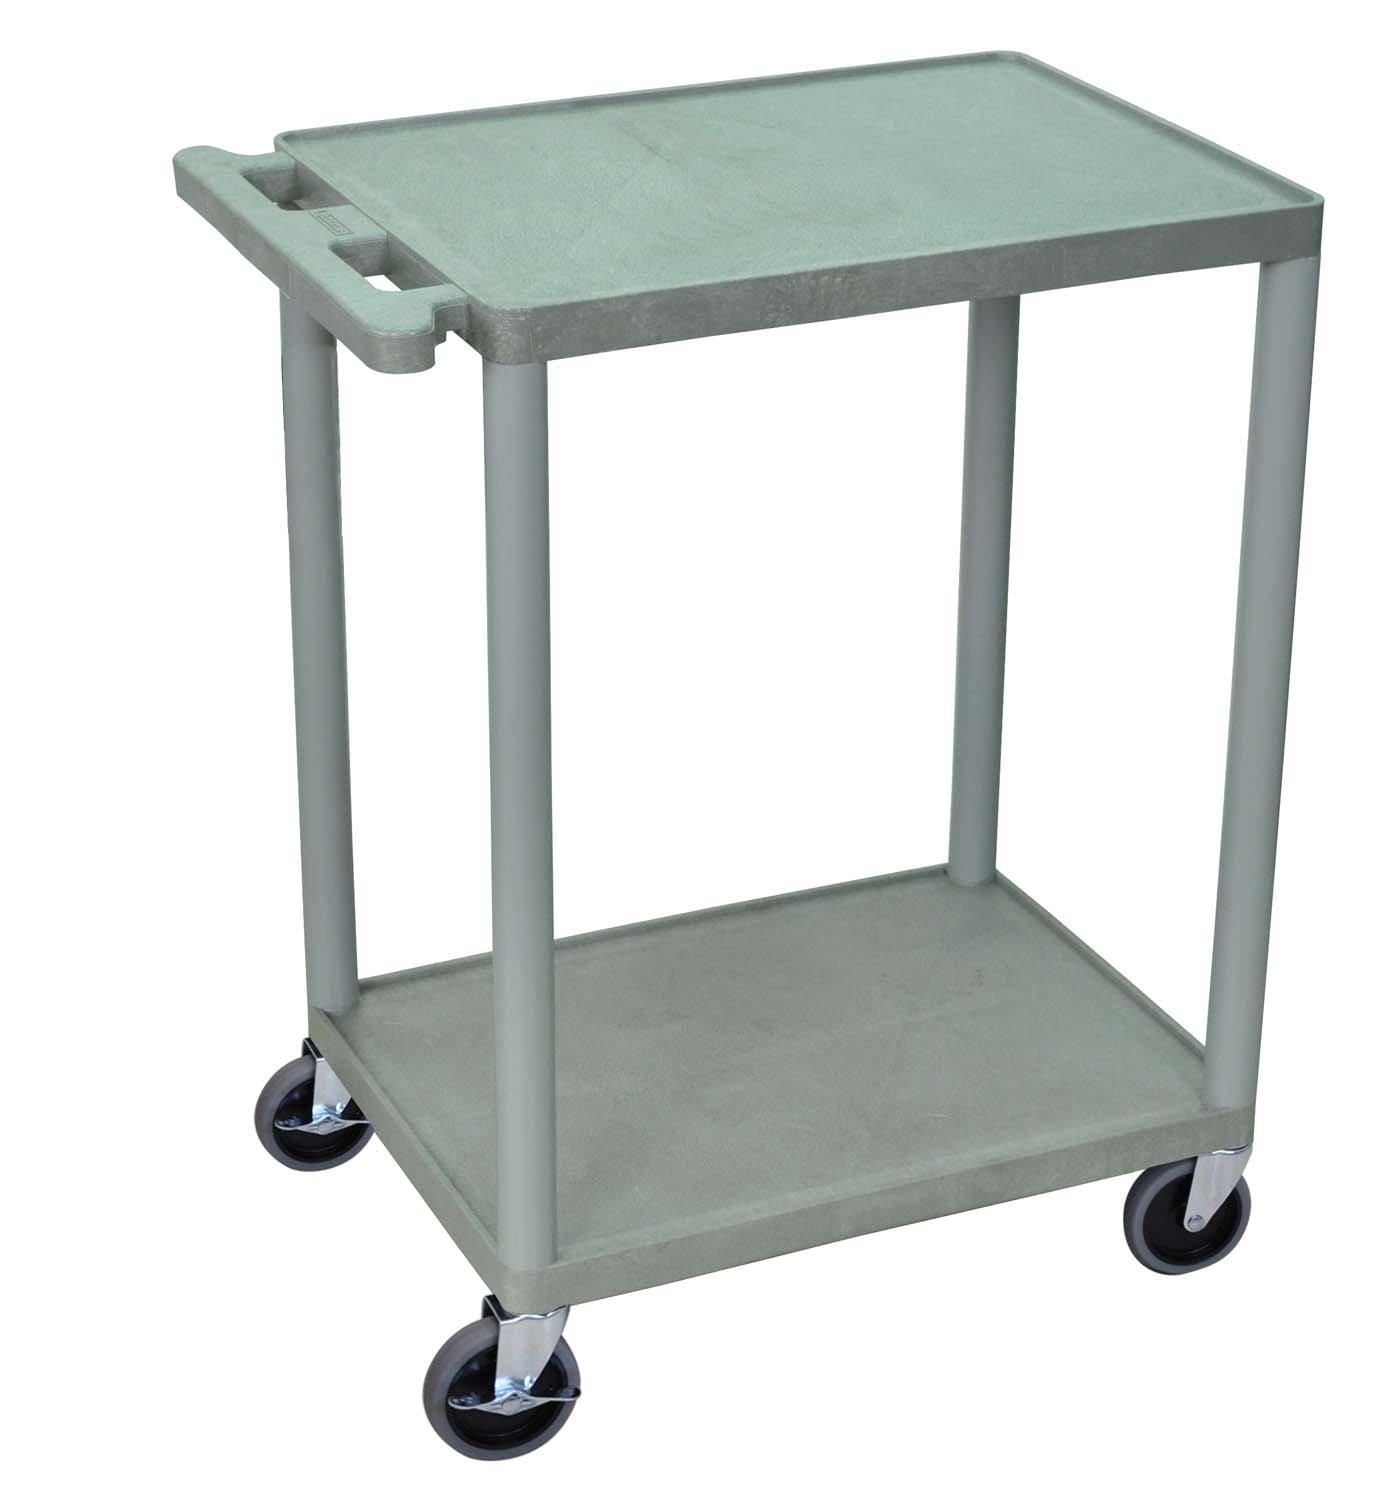 Offex  HE32-G - Utility Cart - Two Shelves Structural Foam Plastic